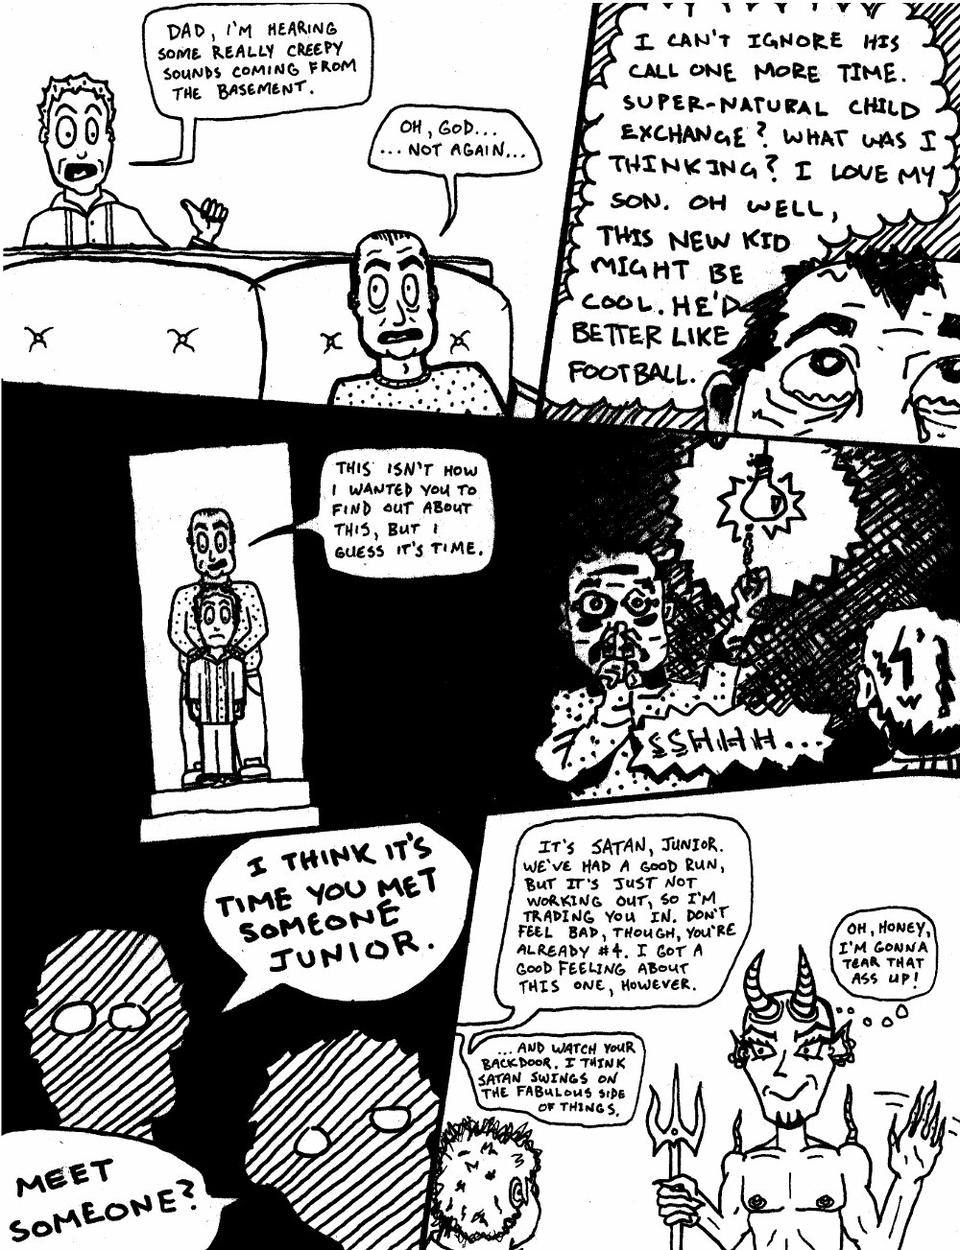 THE BASEMENT (by Marx Marvelous and Nate Crone)